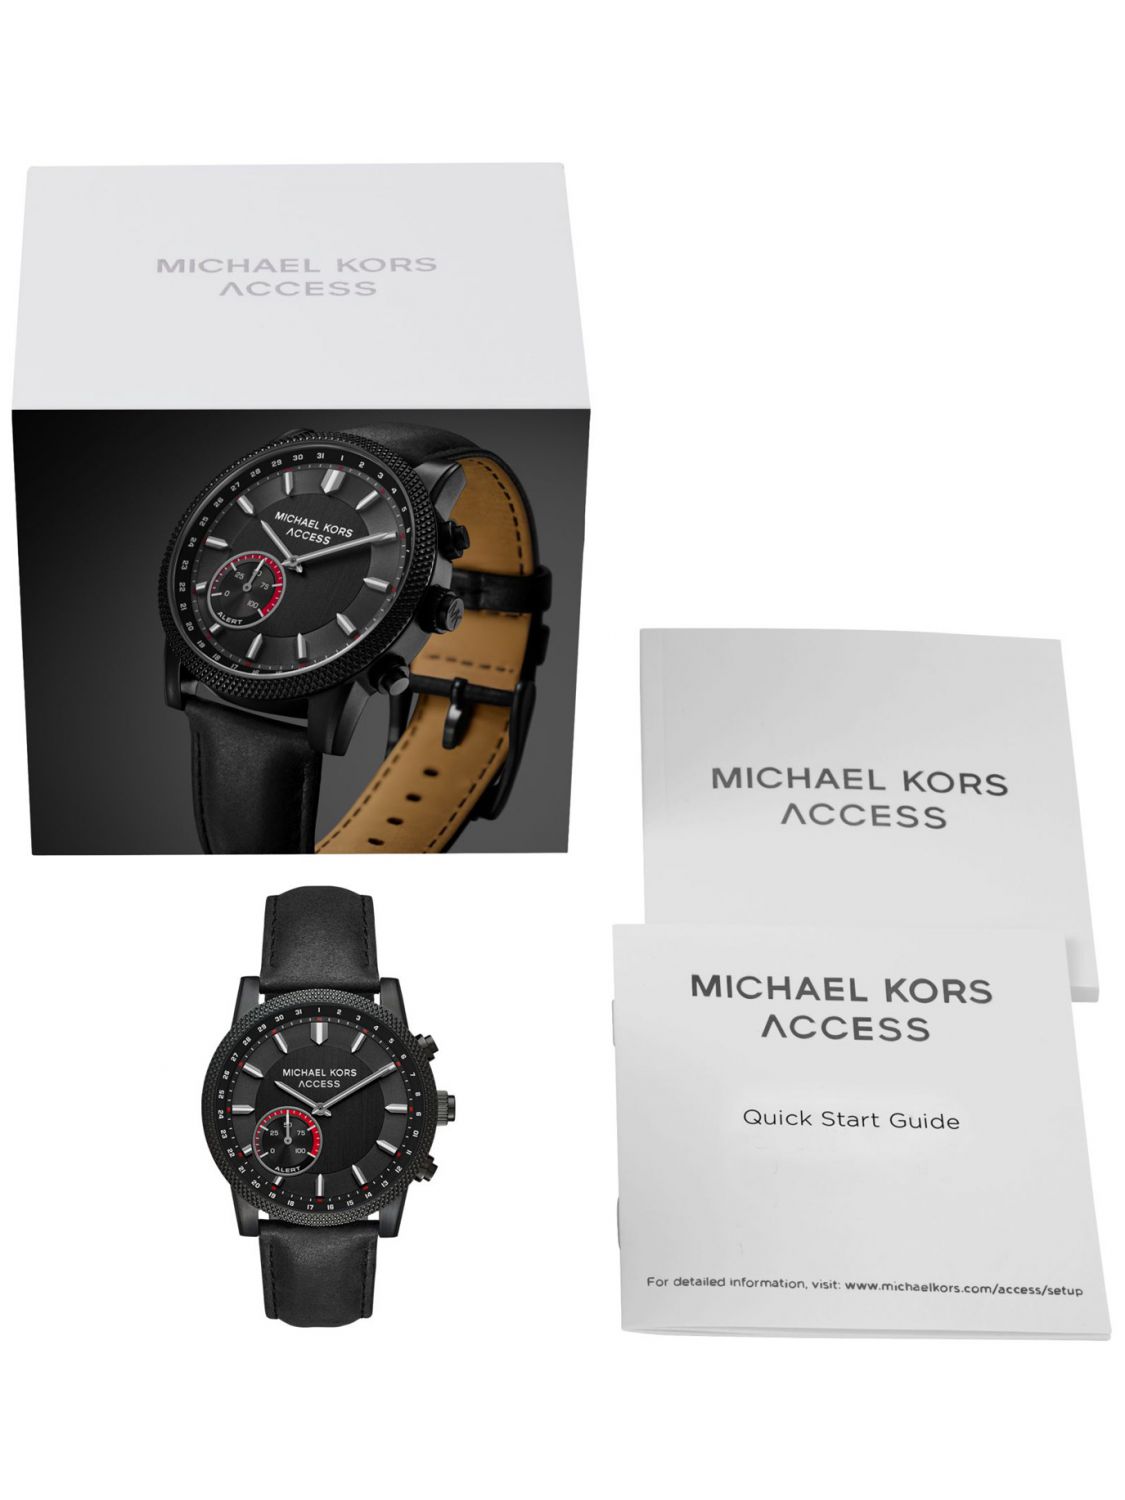 how to set time on michael kors hybrid watch